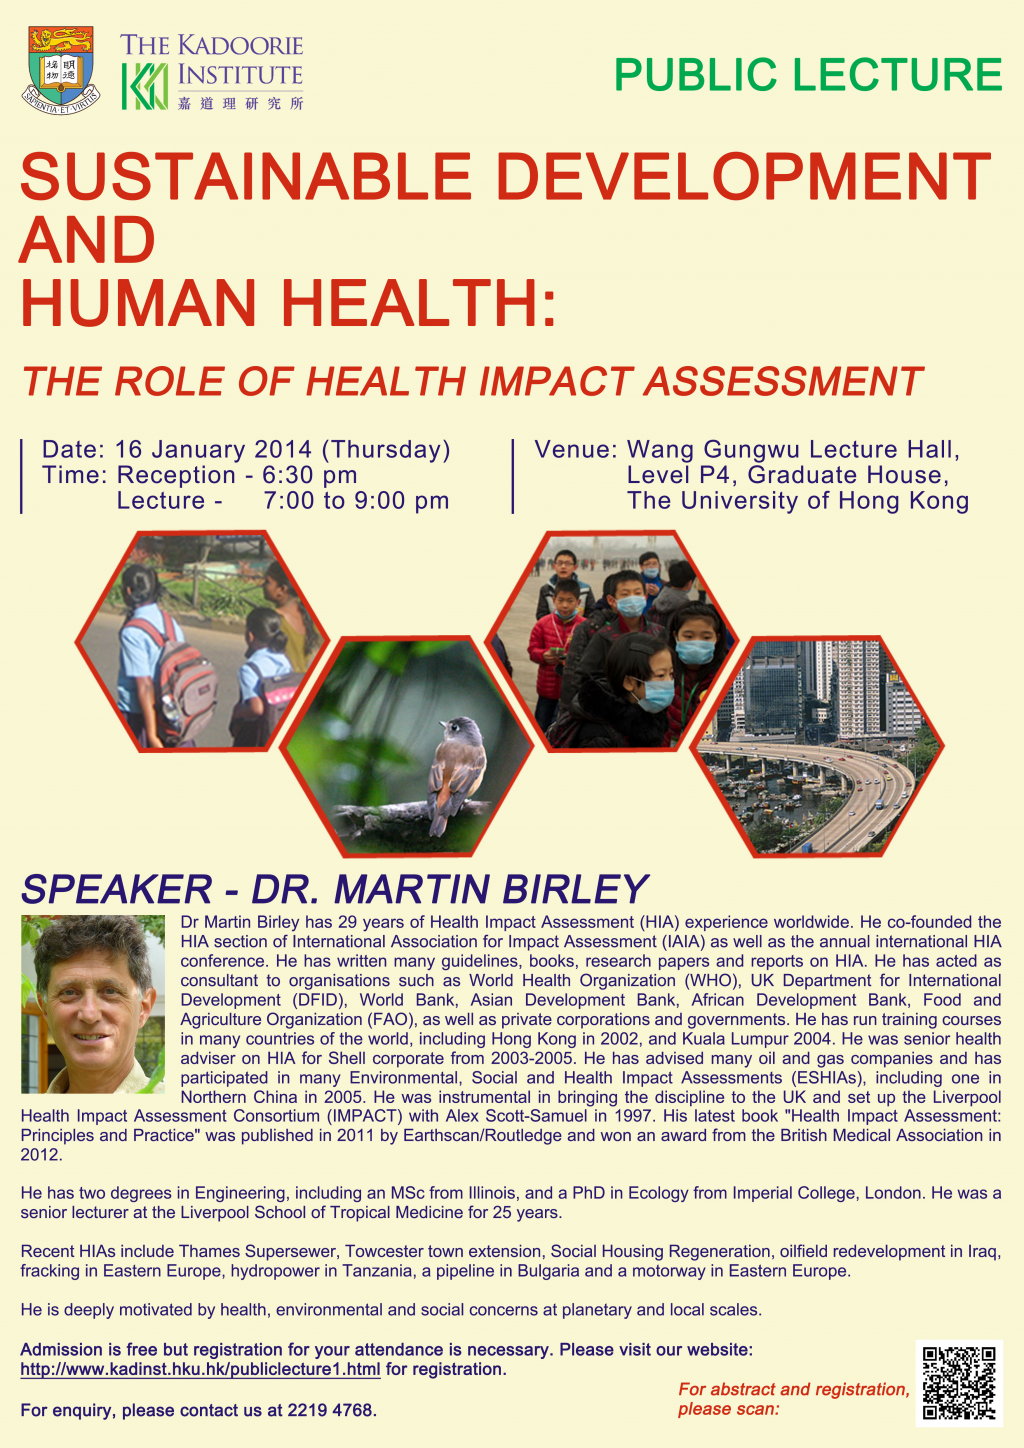 Public Lecture on Sustainable Development and Human Health: the Role of Health Impact Assessment